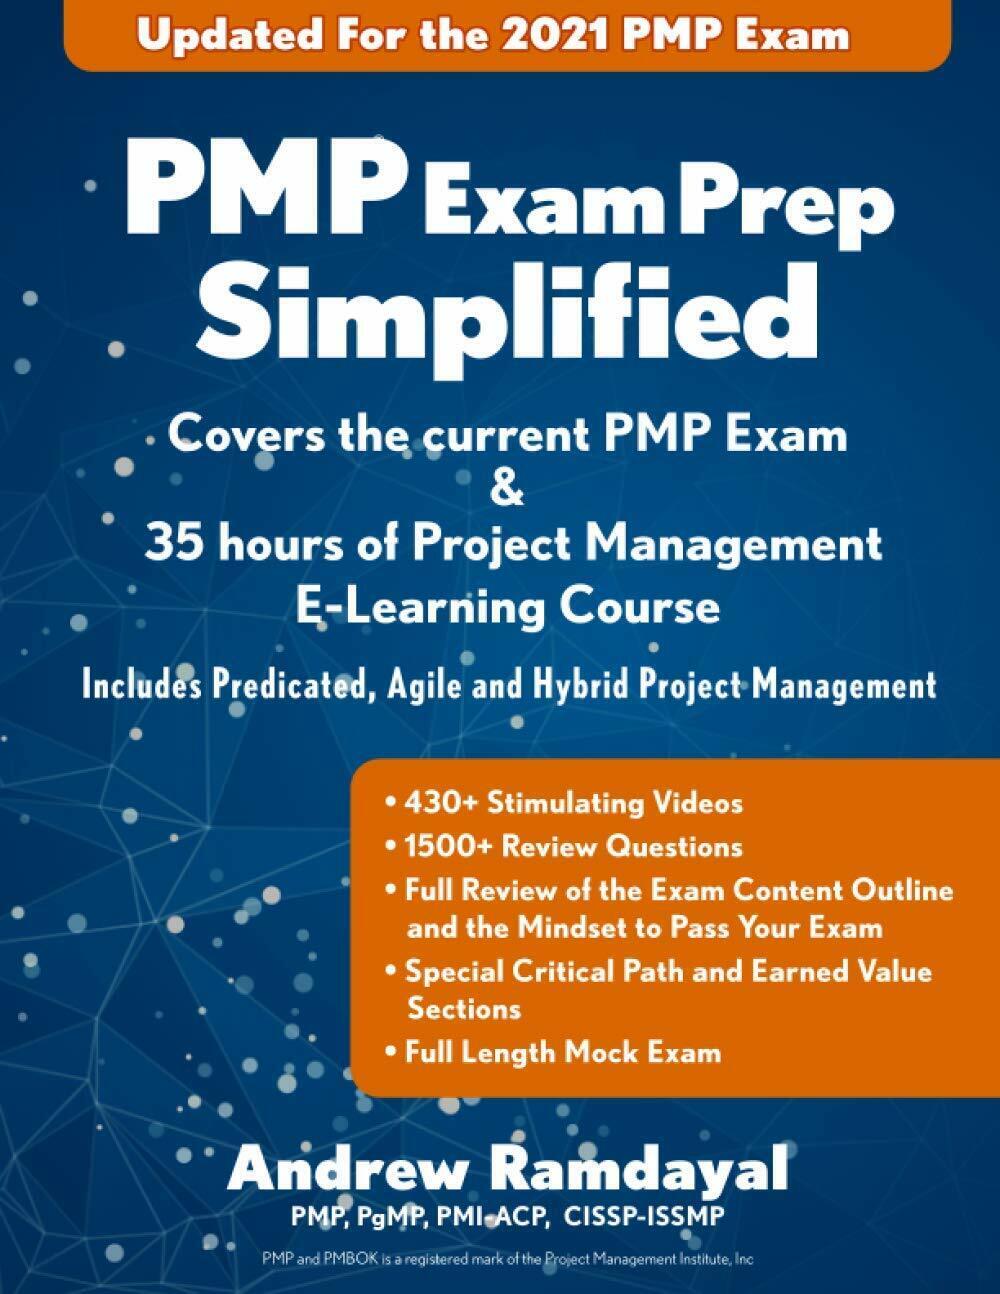 PMP Exam Prep Simplified Covers the Current PMP Exam and Includes a 35 Hours of 